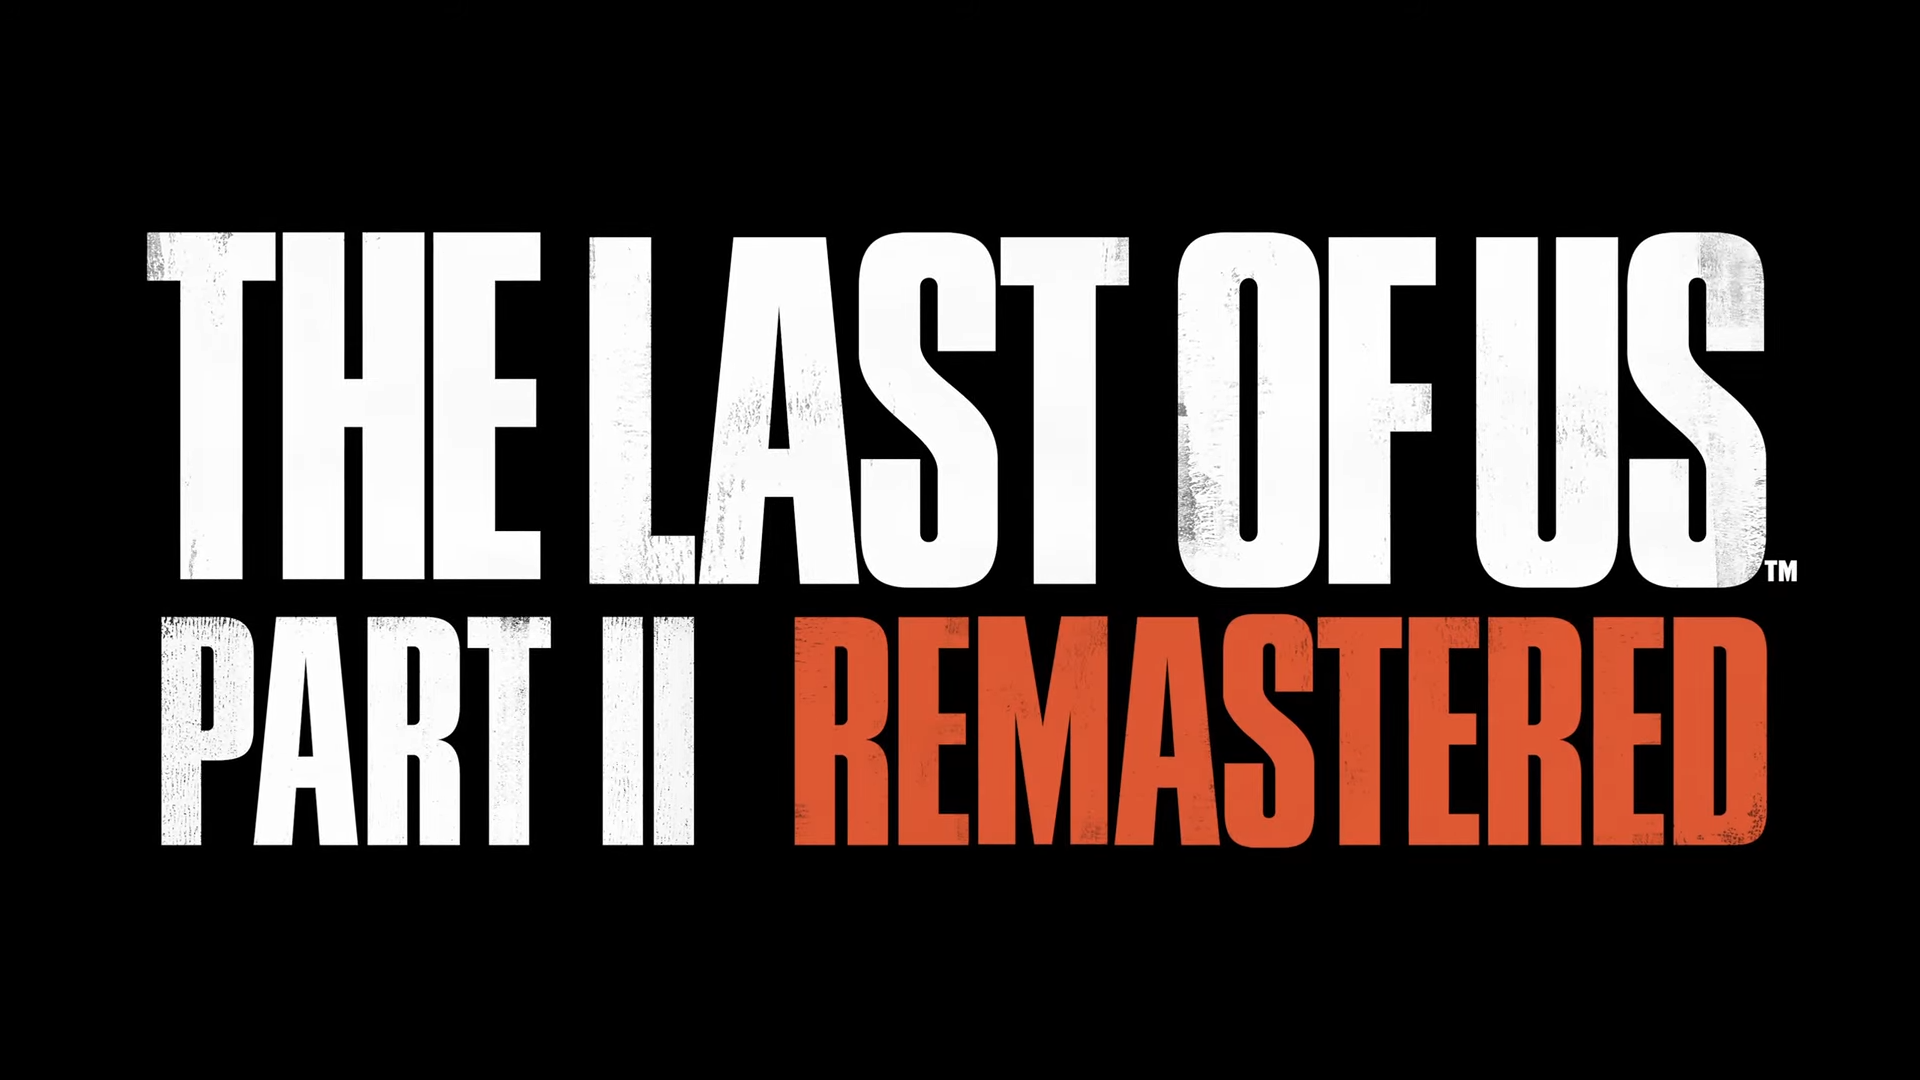 The Last of Us Part II Remastered: game modes, graphics our opinion on  the new features 